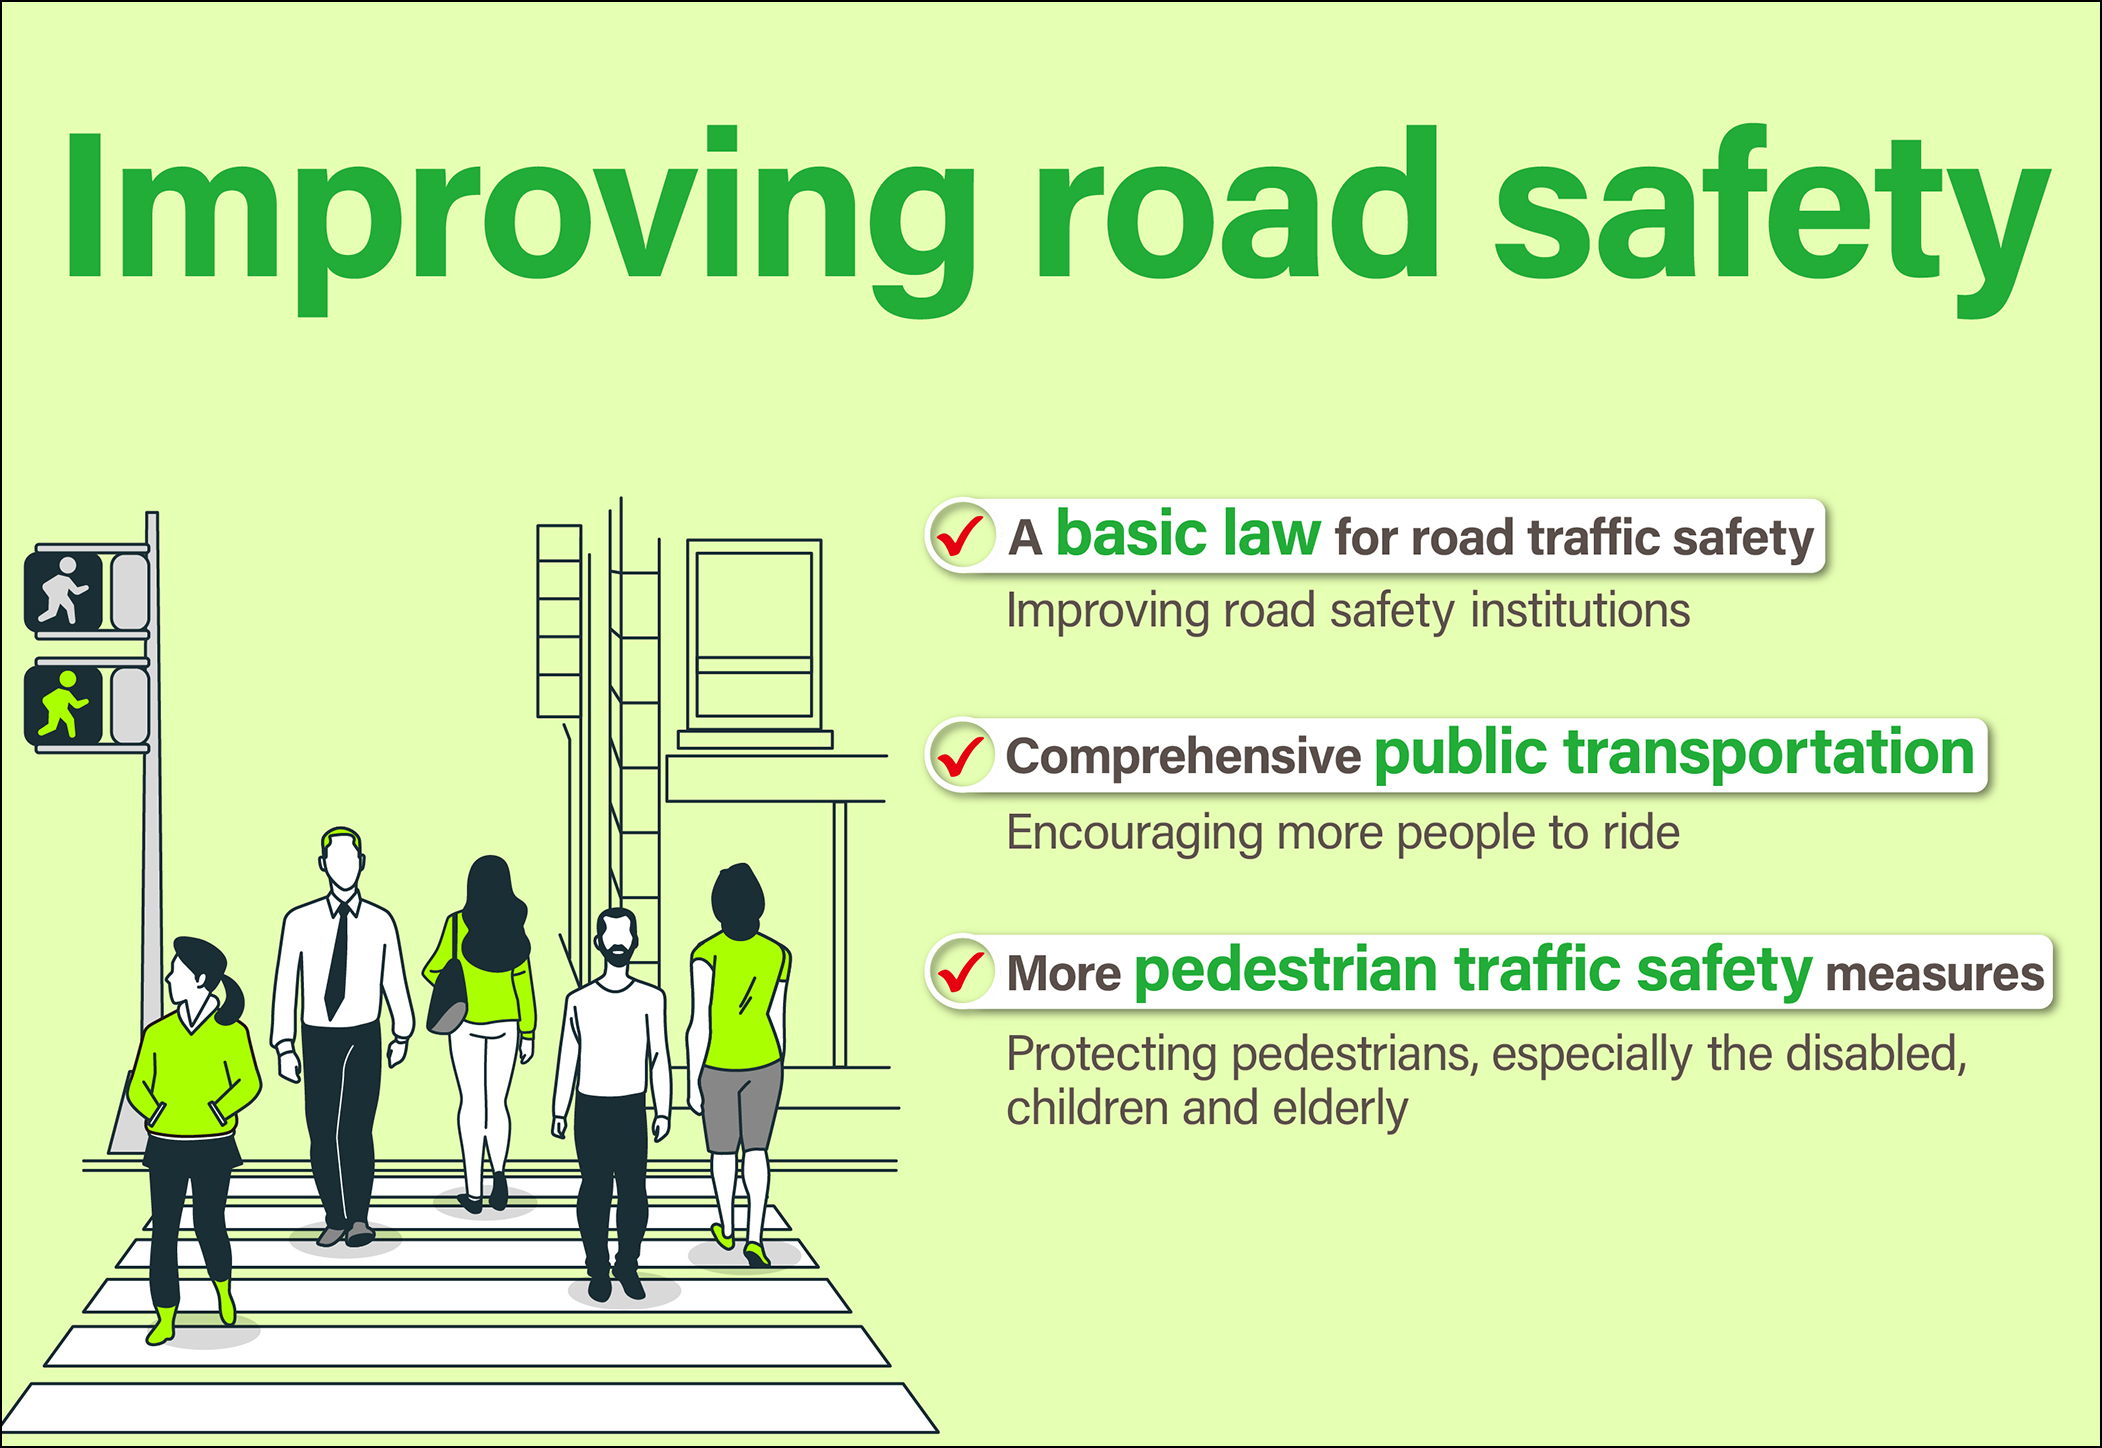 Policy guidelines for pedestrian traffic safety (2023-2027)